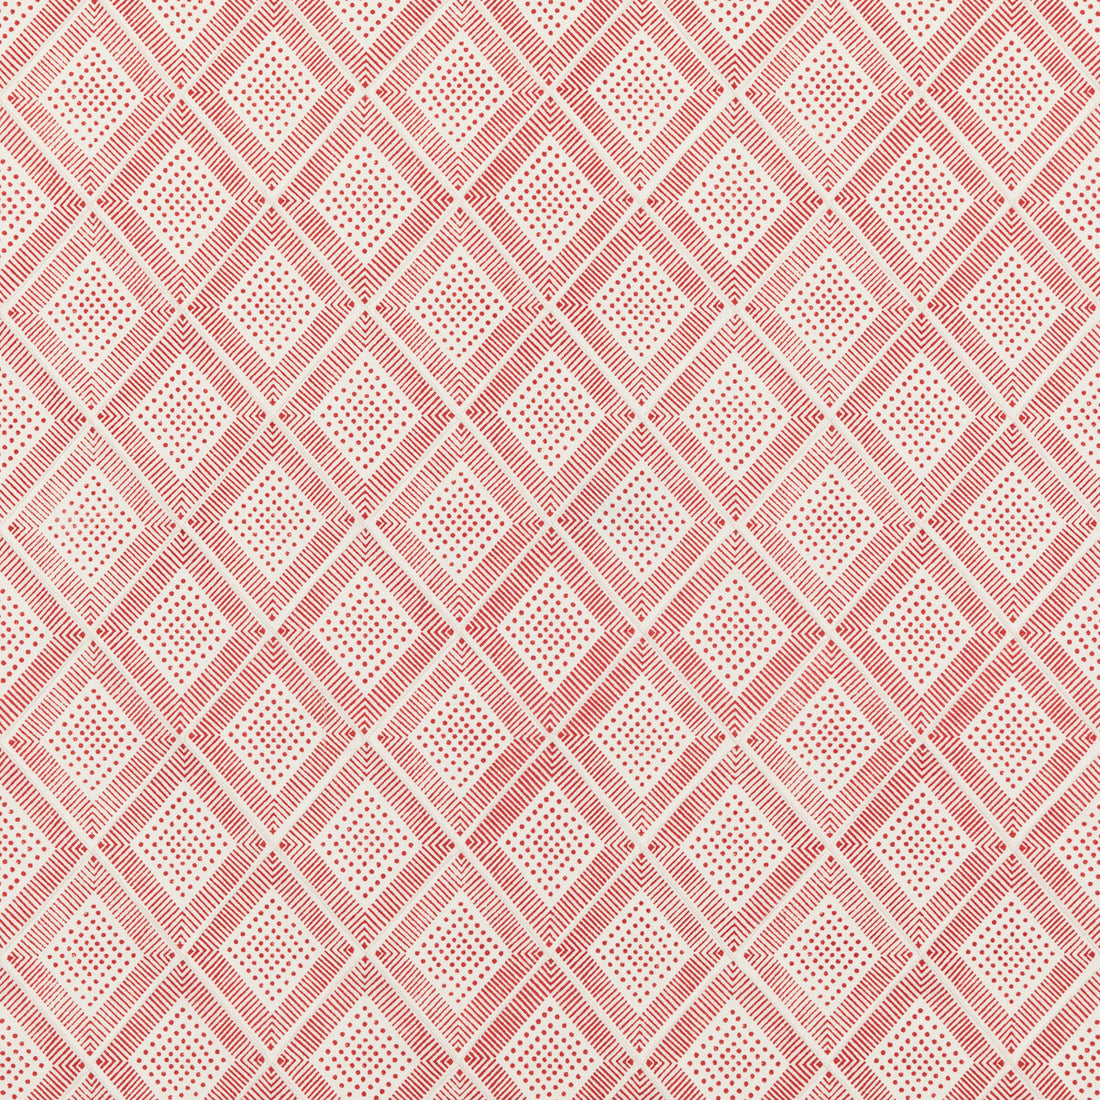 Block Trellis fabric in rustic red color - pattern PP50484.2.0 - by Baker Lifestyle in the Block Party collection